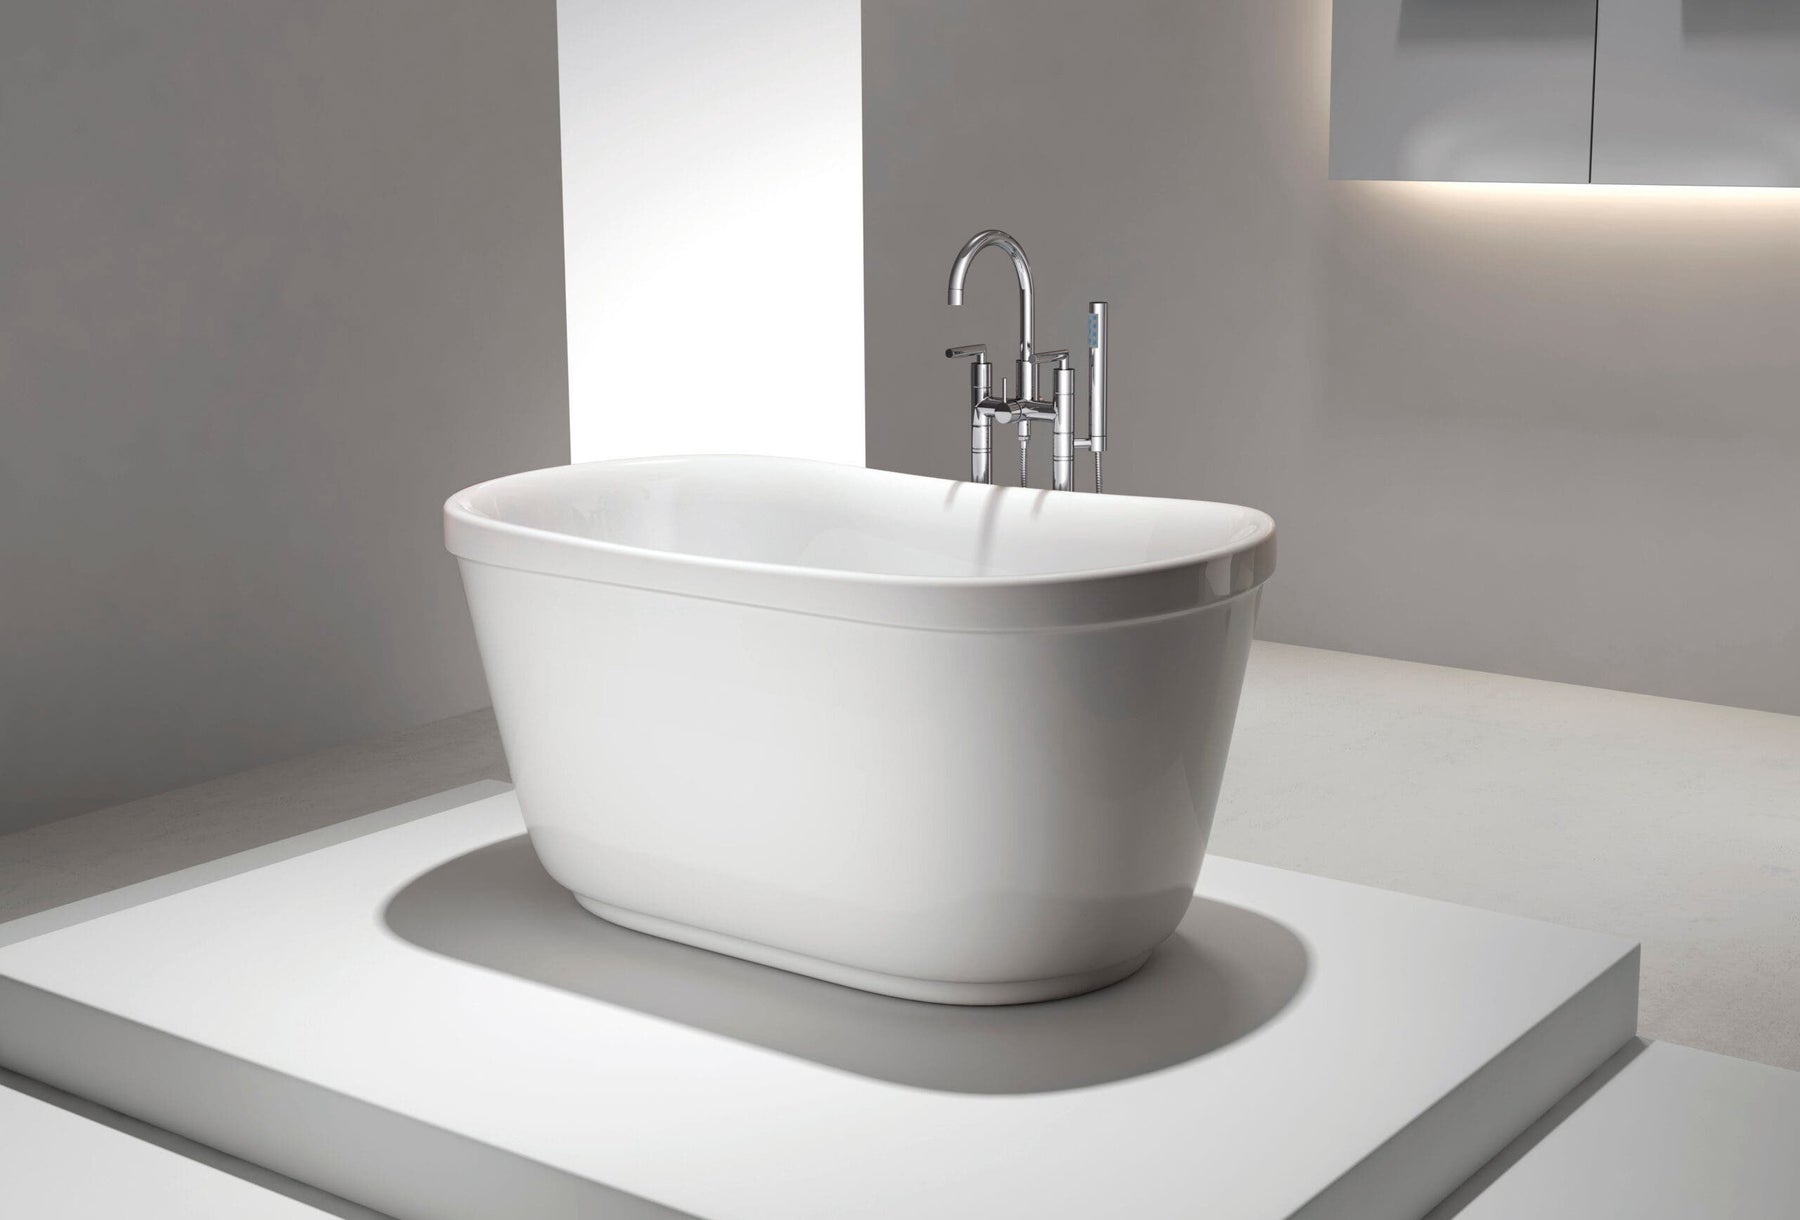 4 Ways to Make Your Mini Tub the Focal Point of Your Bathroom